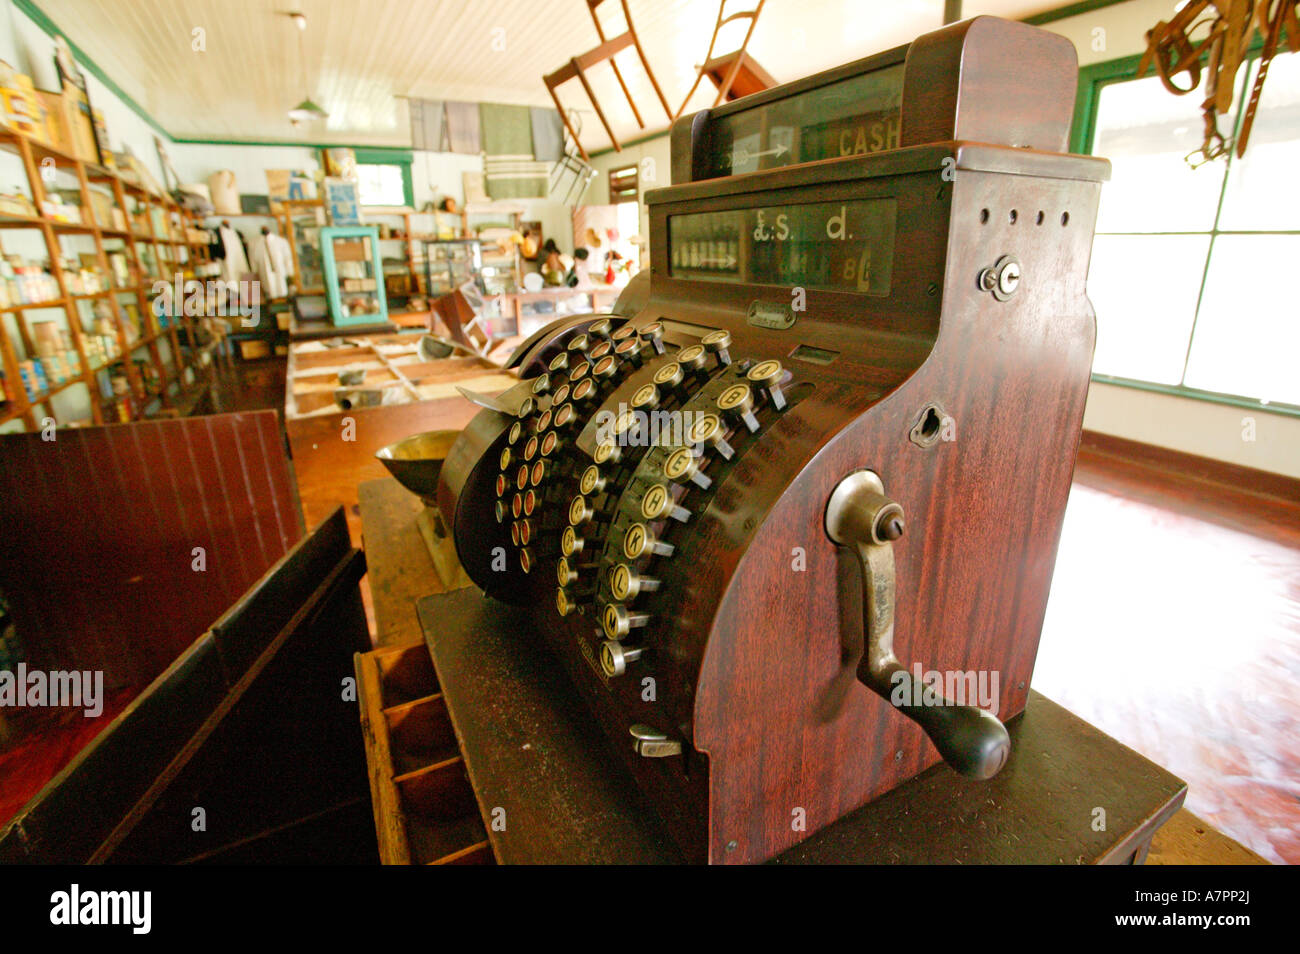 The interior of the Dredzen general dealer store in Pilgrims Rest showing the till. Typical 1930 - 1950 Stock Photo